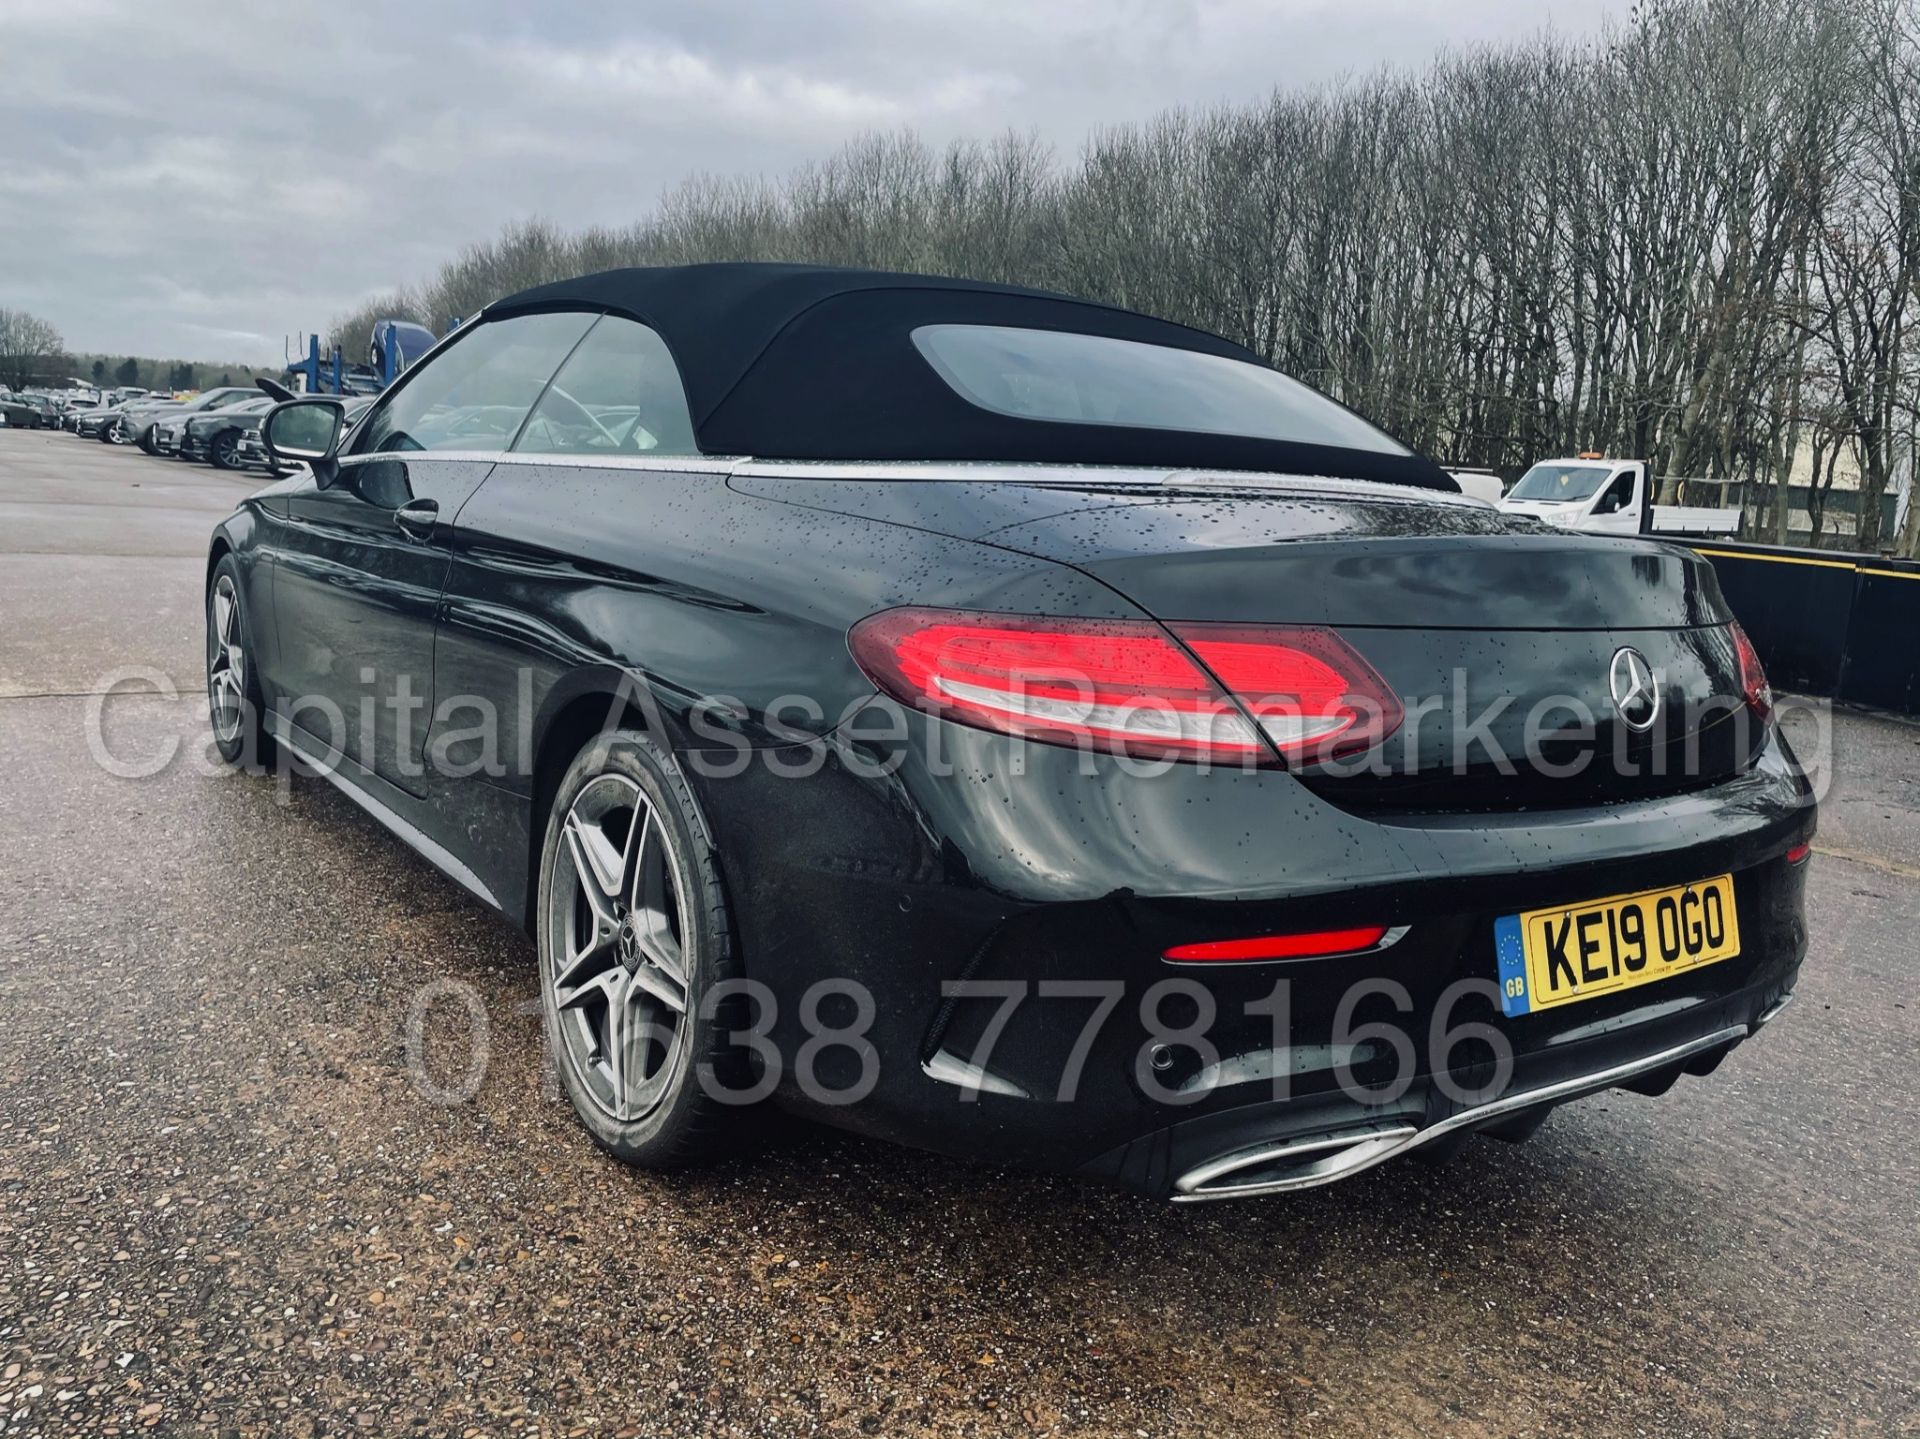 (ON SALE) MERCEDES-BENZ C220D *AMG LINE - CABRIOLET* (2019) '9G TRONIC AUTO - LEATHER - SAT NAV' - Image 12 of 56